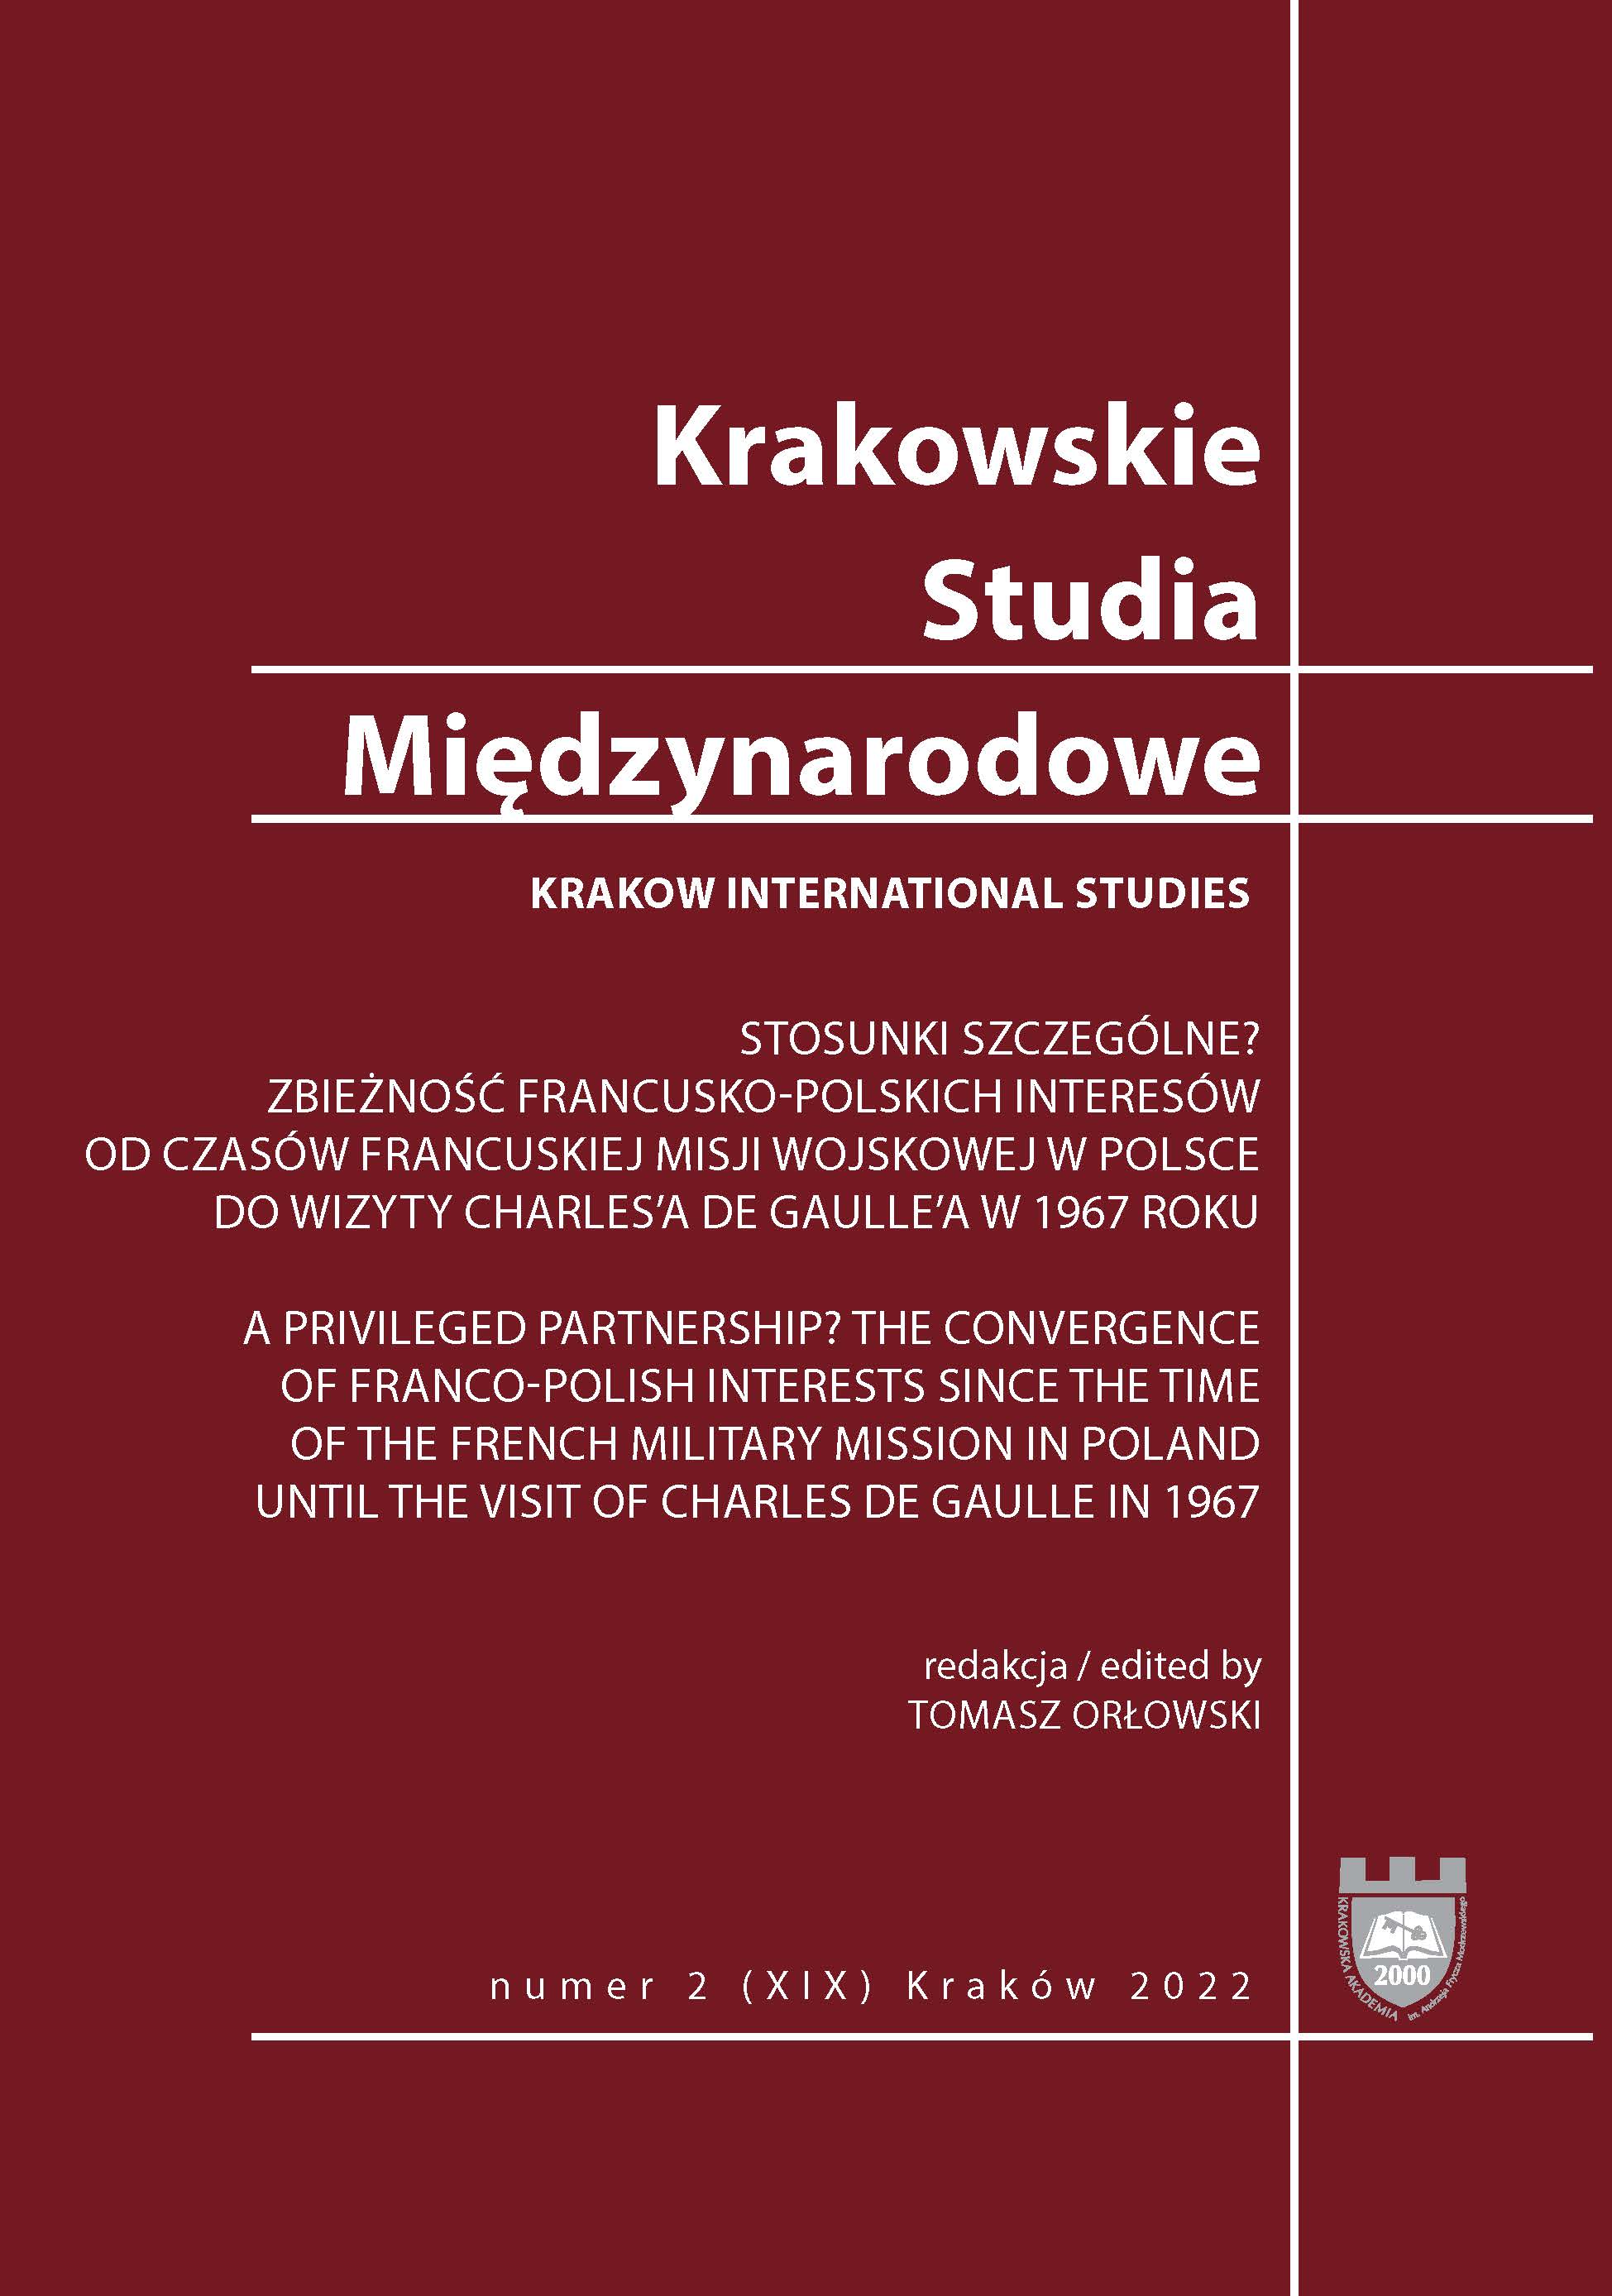 A privileged partnership? The convergence of Franco-Polish interests since the time of the French Military Mission in Poland until the visit of Charles de Gaulle in 1967. Introduction Cover Image